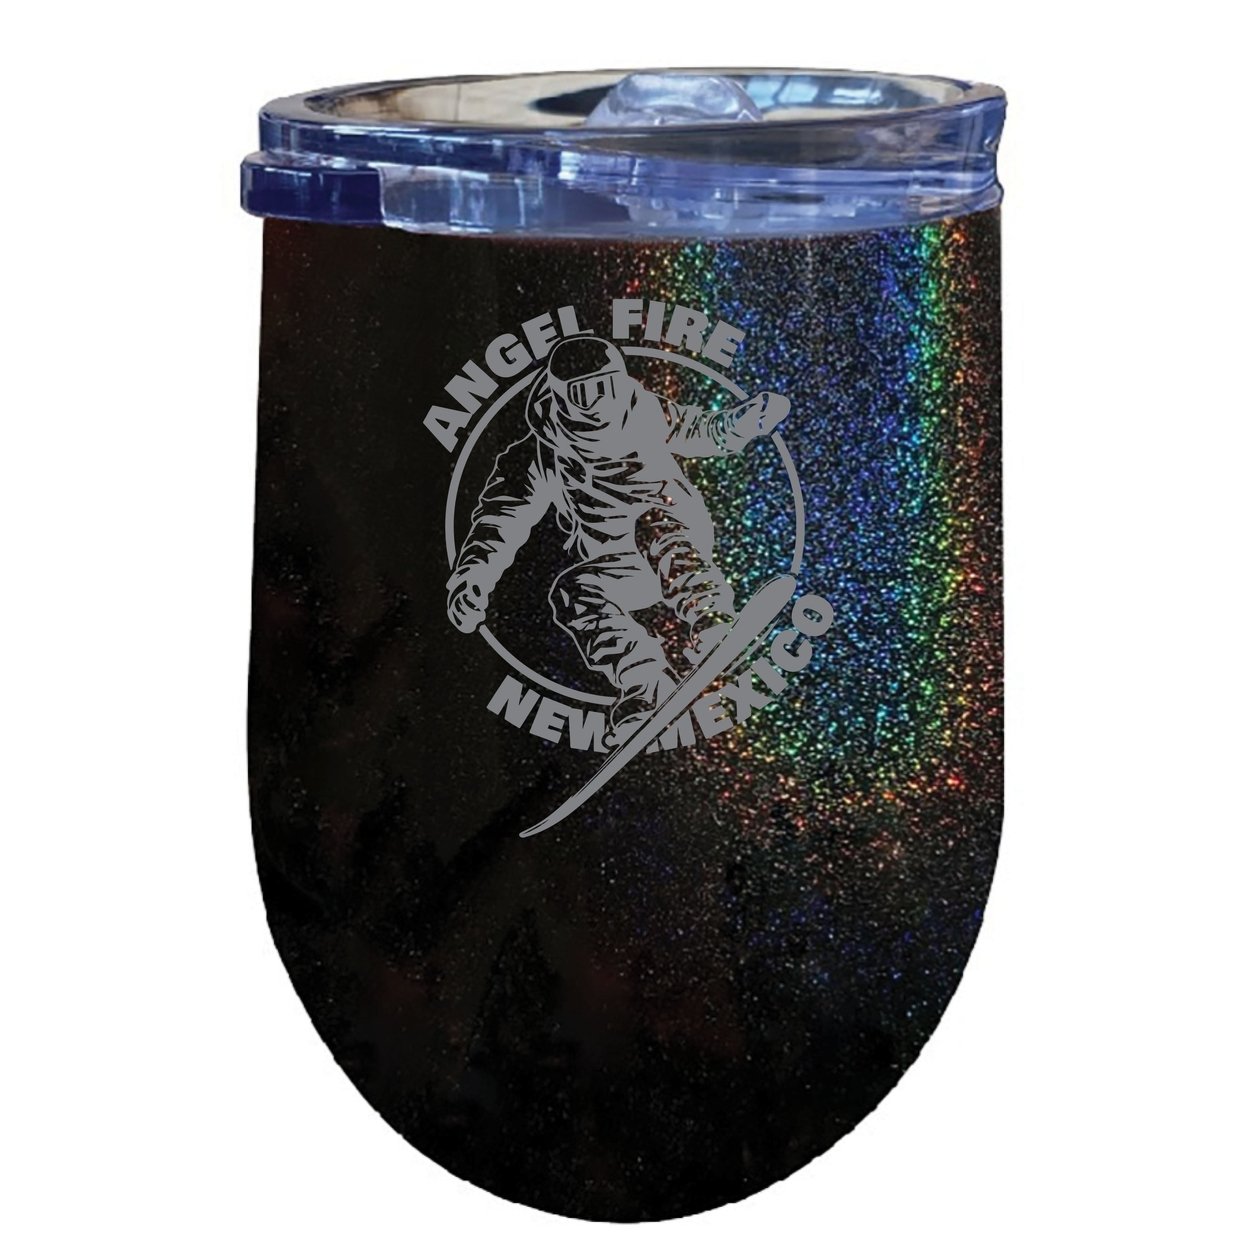 Angel Fire New Mexico Souvenir 12 Oz Engraved Insulated Wine Stainless Steel Tumbler - Rainbow Glitter Gray,,2-Pack